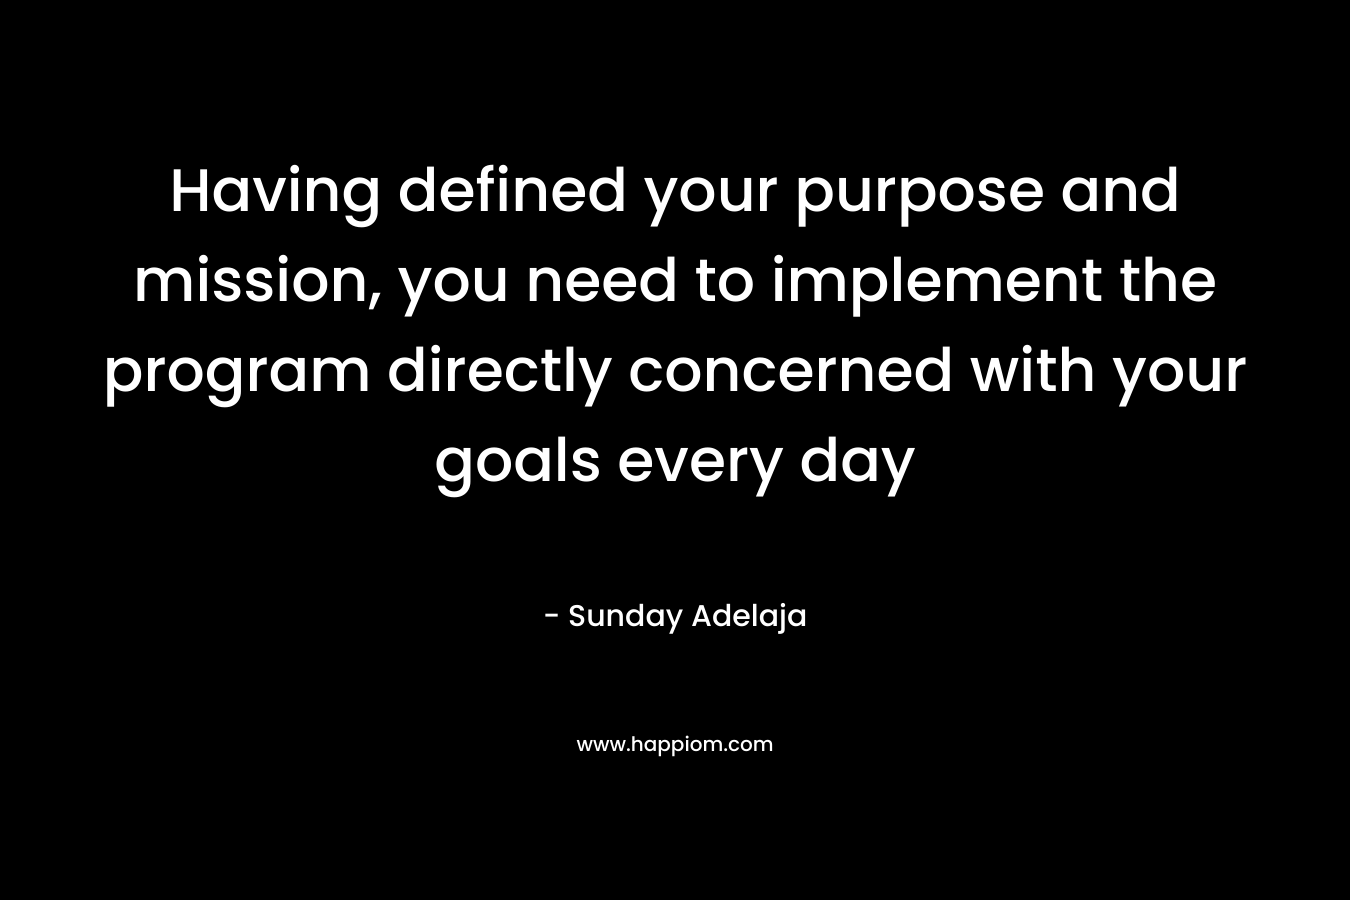 Having defined your purpose and mission, you need to implement the program directly concerned with your goals every day